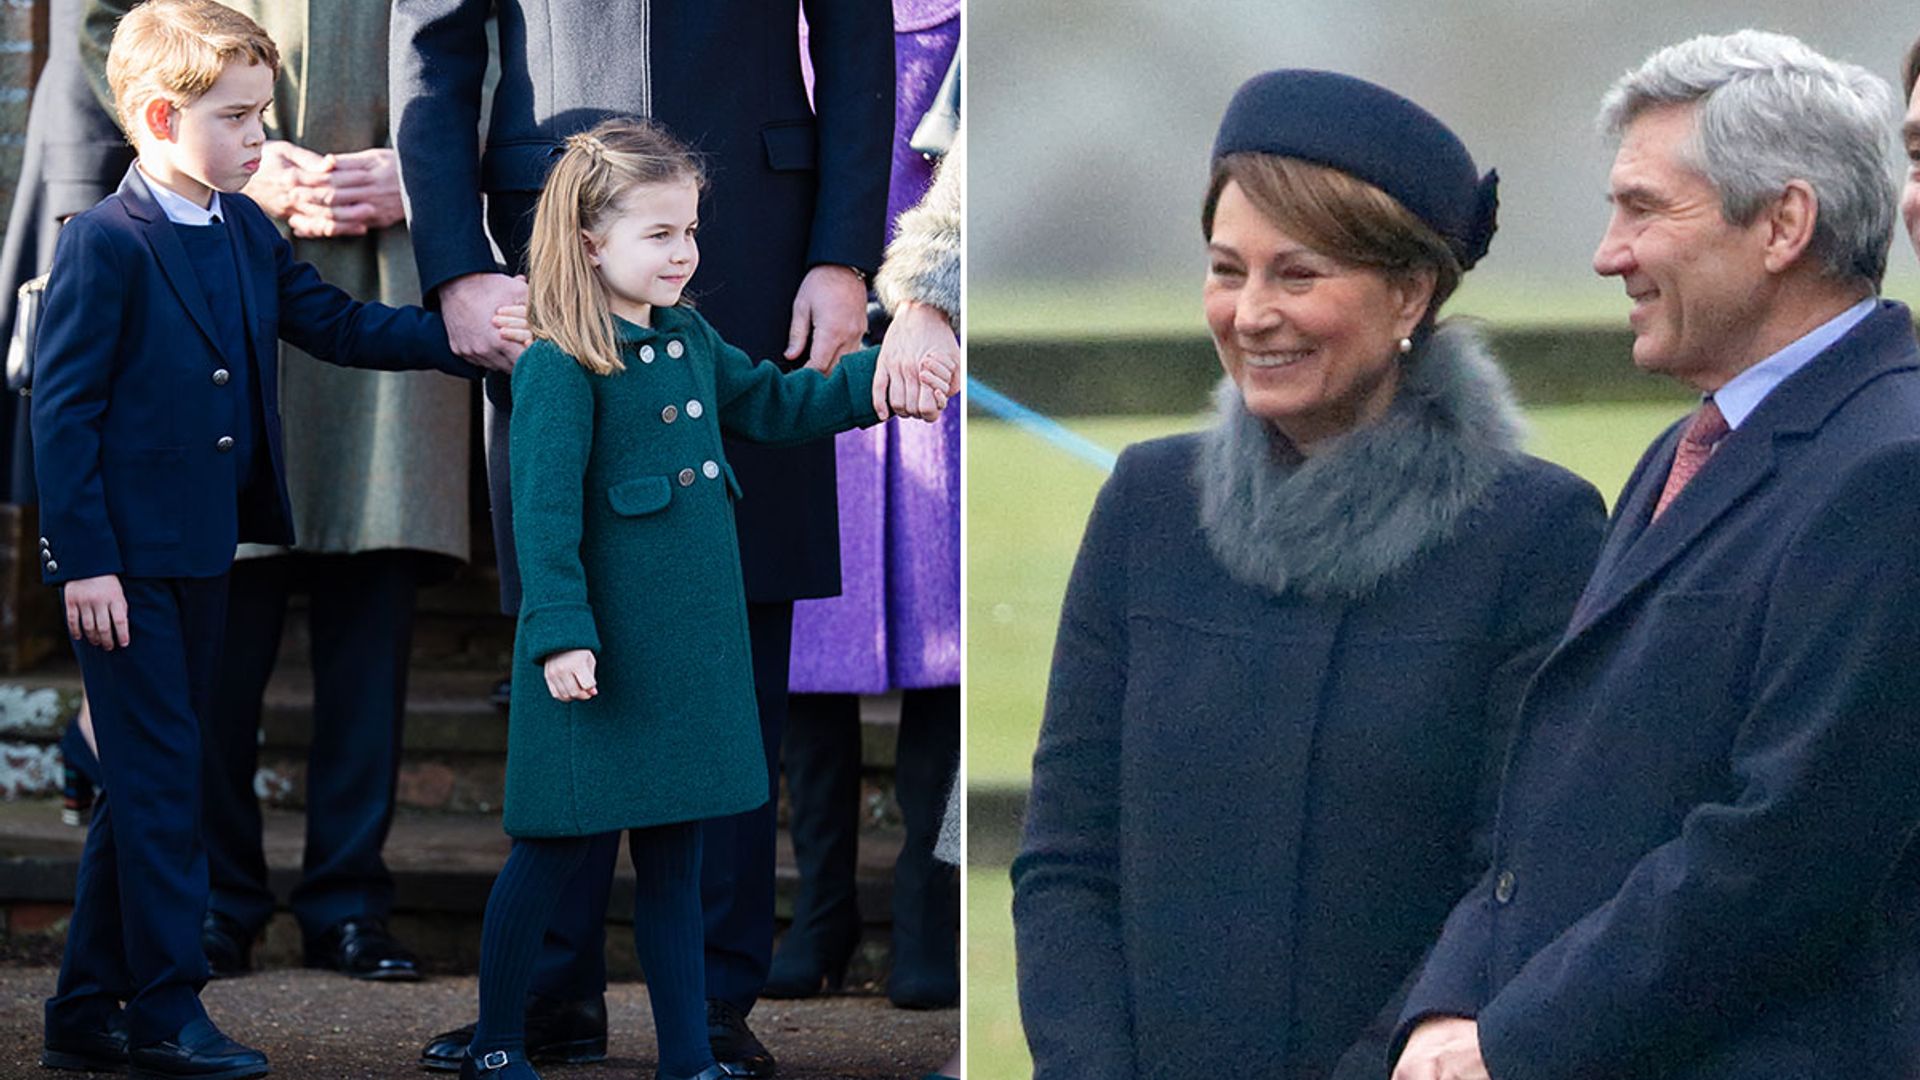 Carole Middleton reveals Christmas plans for George, Charlotte and Louis - plus Pippa Middleton's kids too